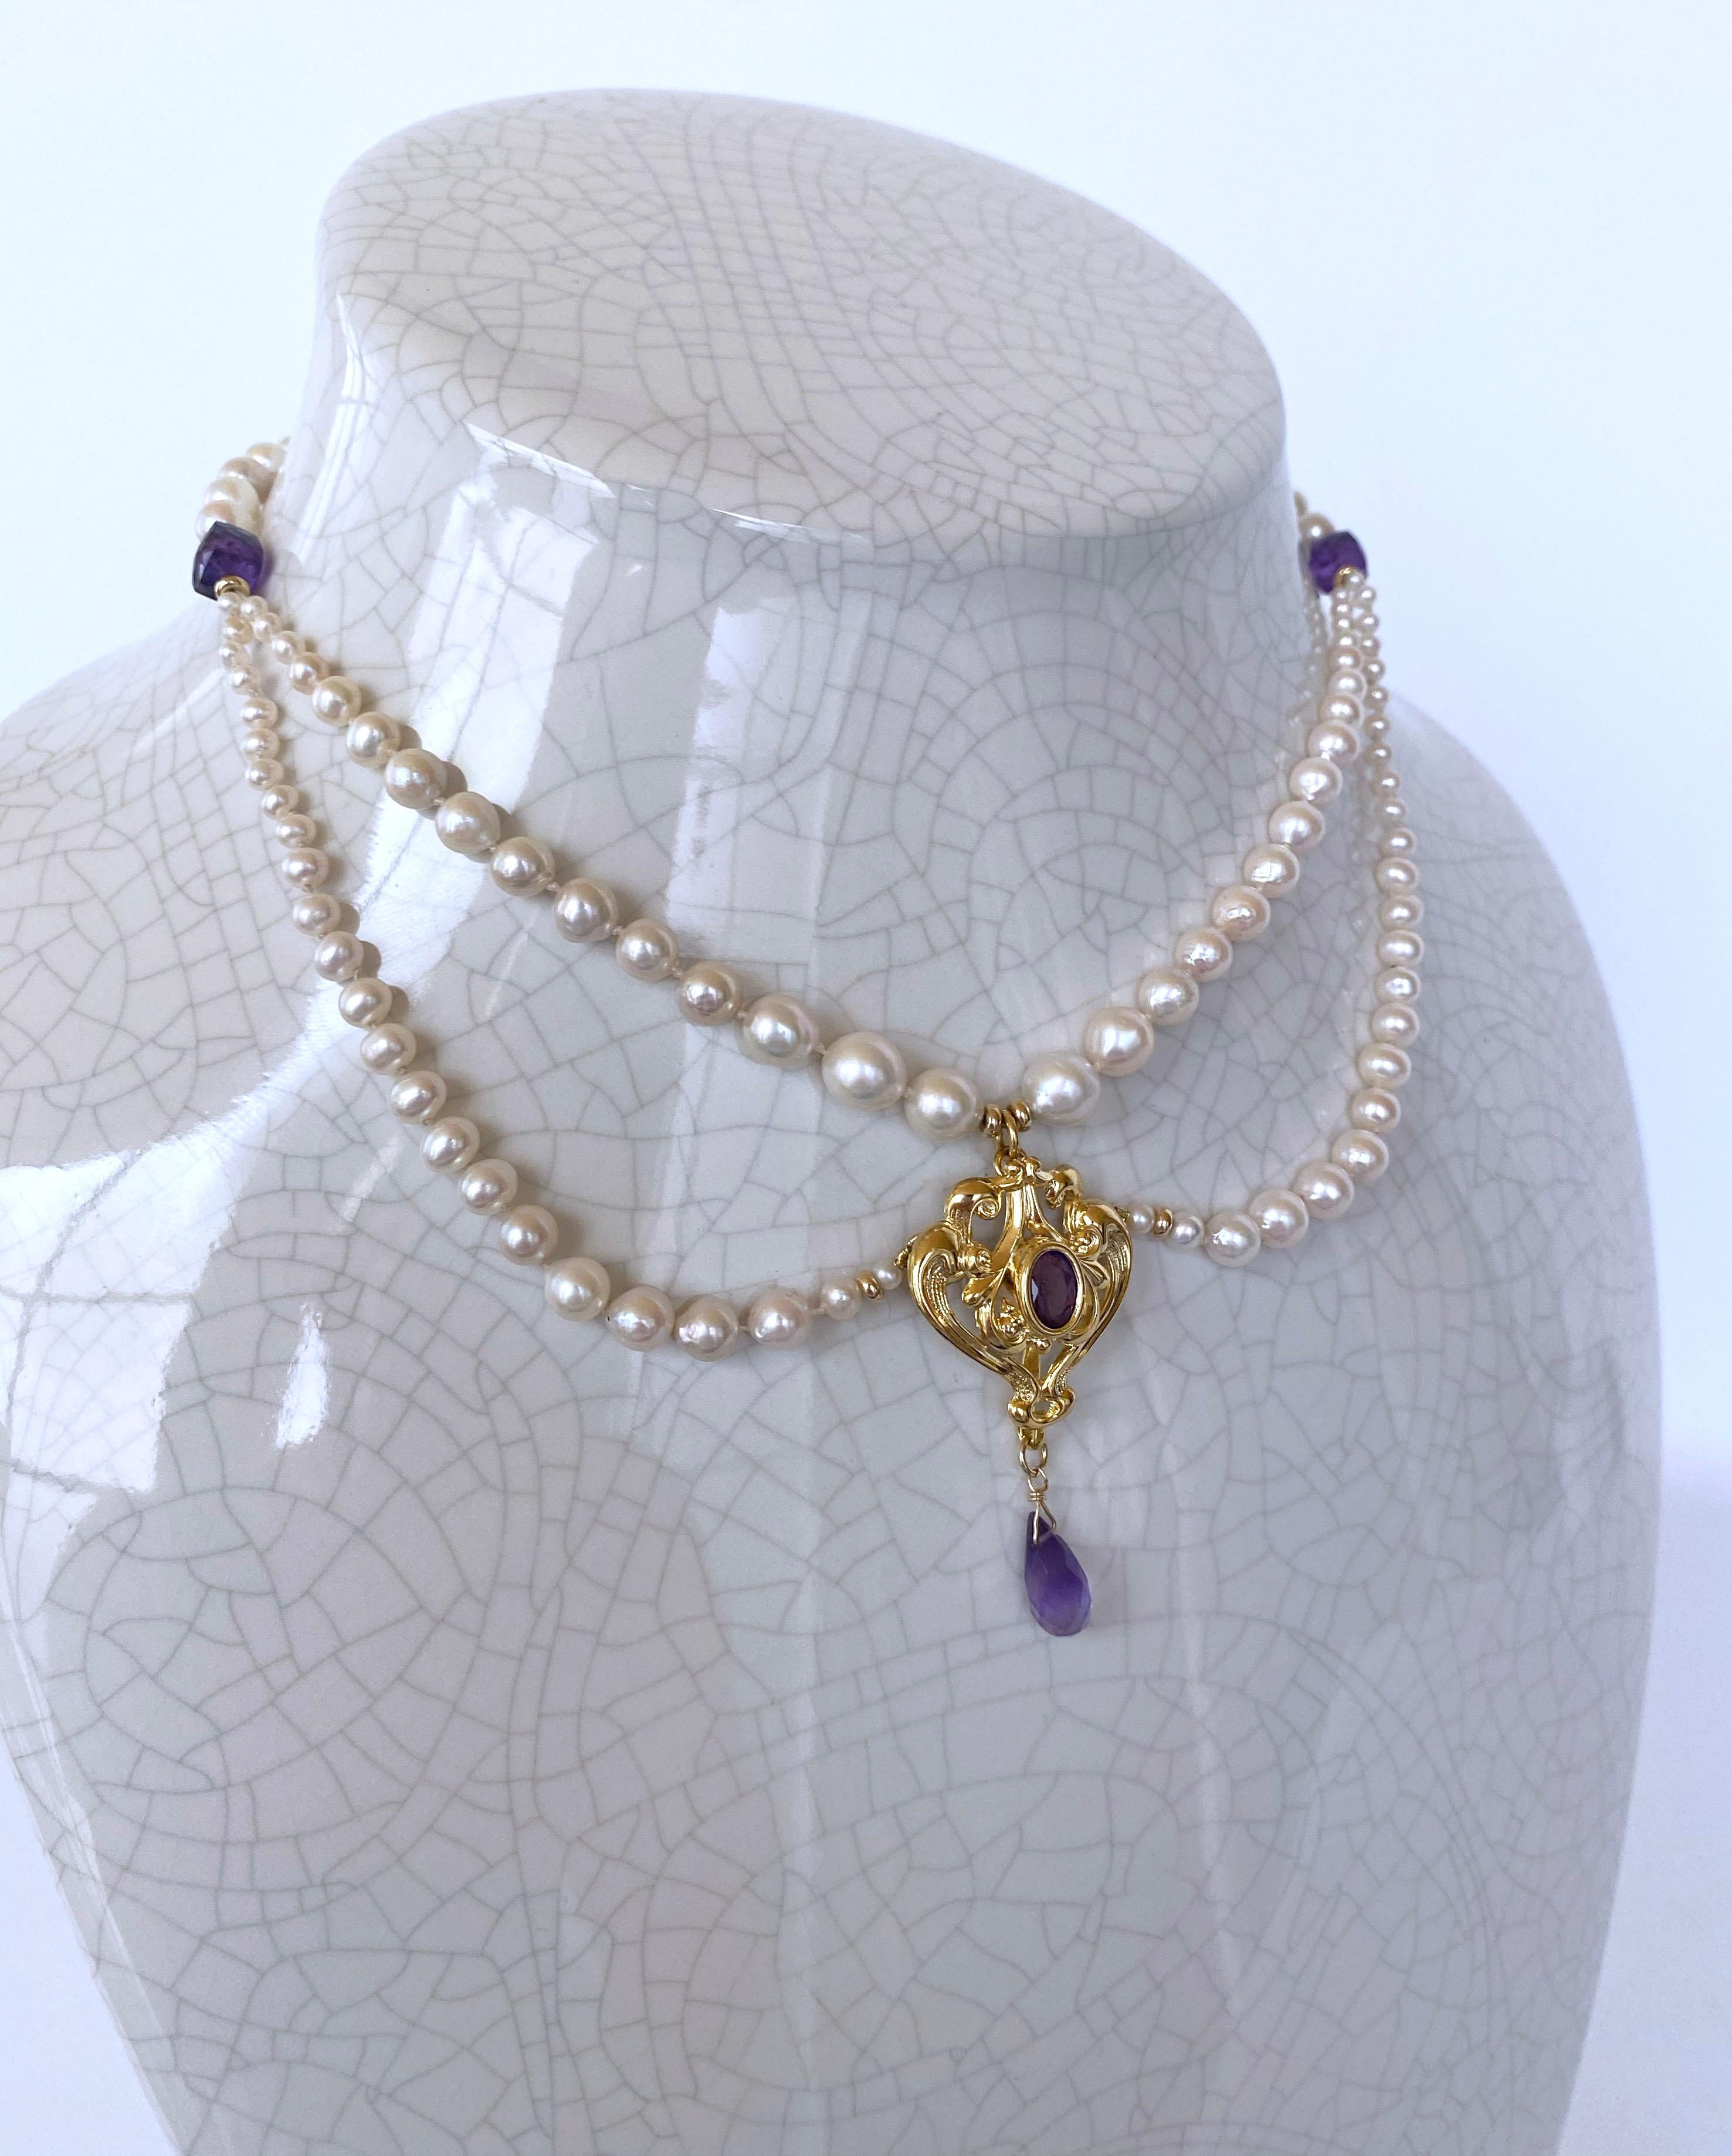 Bead Marina J. Graduated Pearl and Amethyst Necklace with 14K Yellow Gold